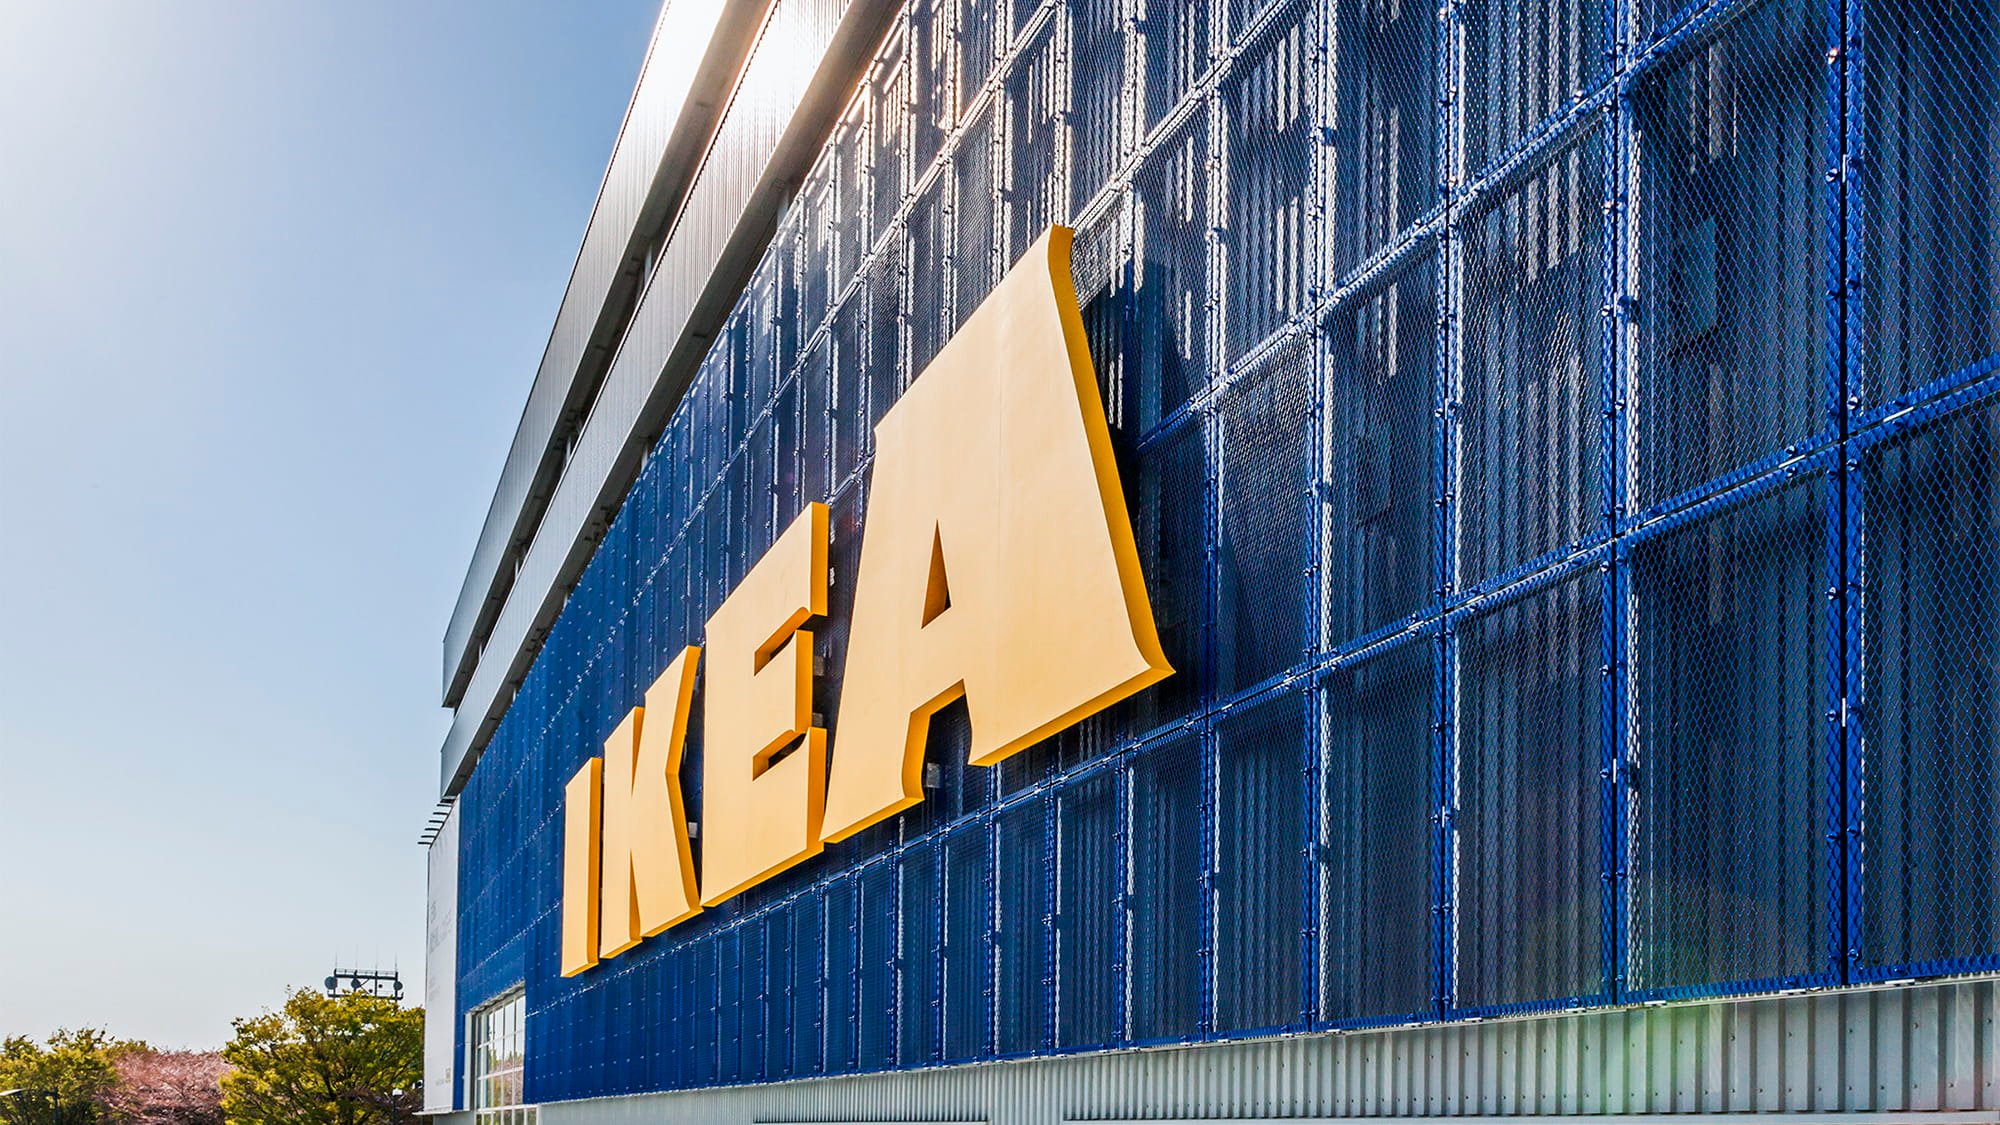 Ikea store facade, Japan. The multinational furniture and household stores can be recognised worldwide. Photo: Kenj Kobayashi